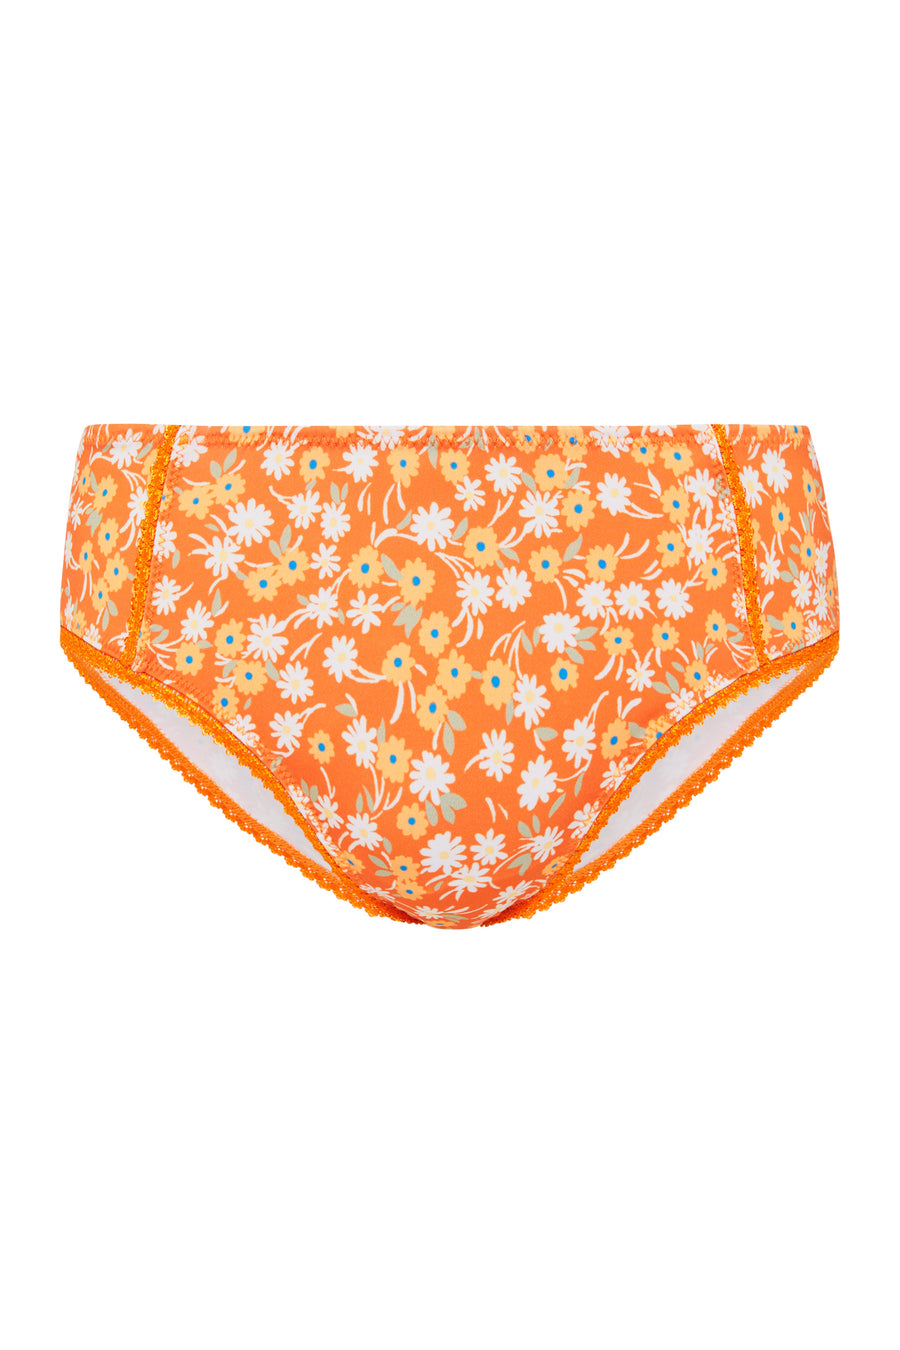 Spell Freda Bloomers Amber